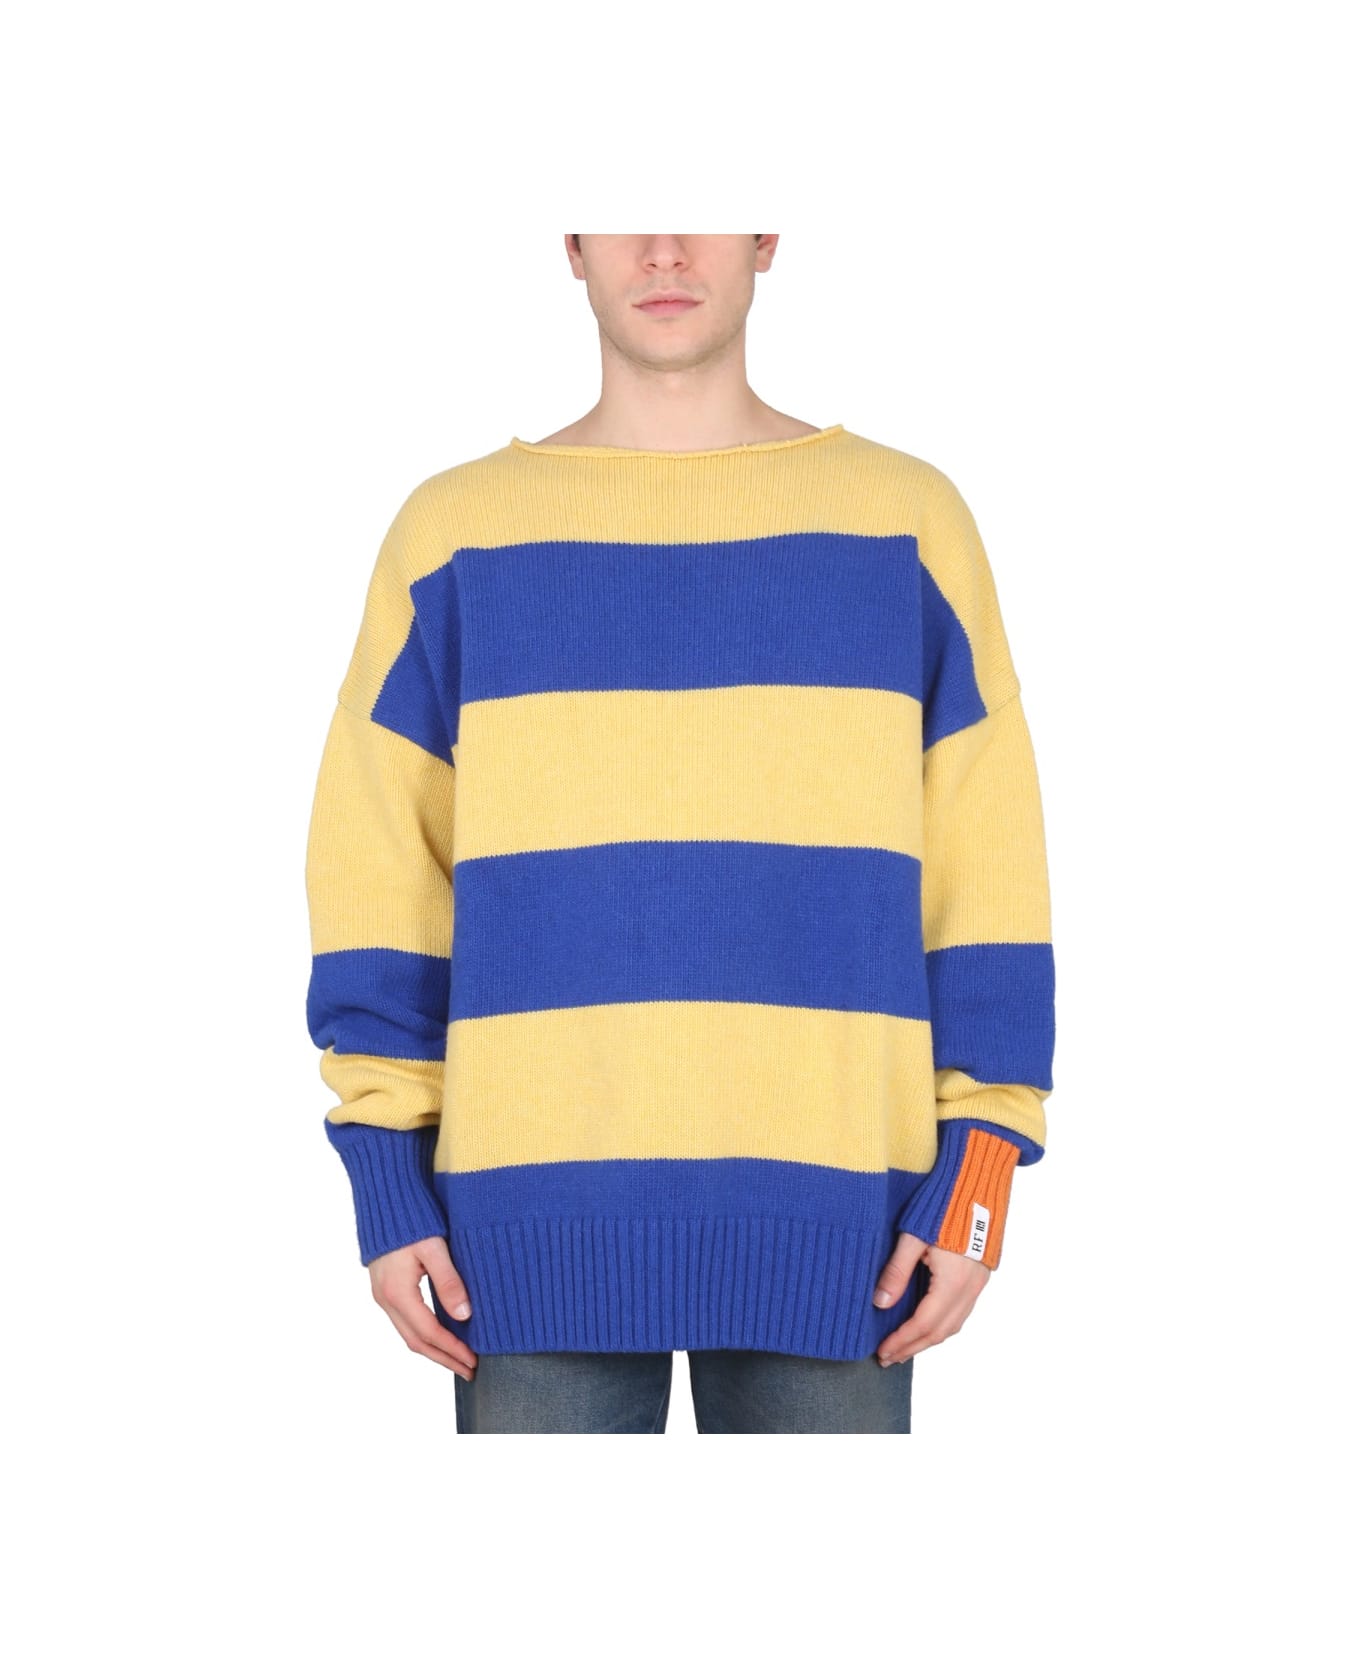 Right For Striped Shirt - YELLOW name:475